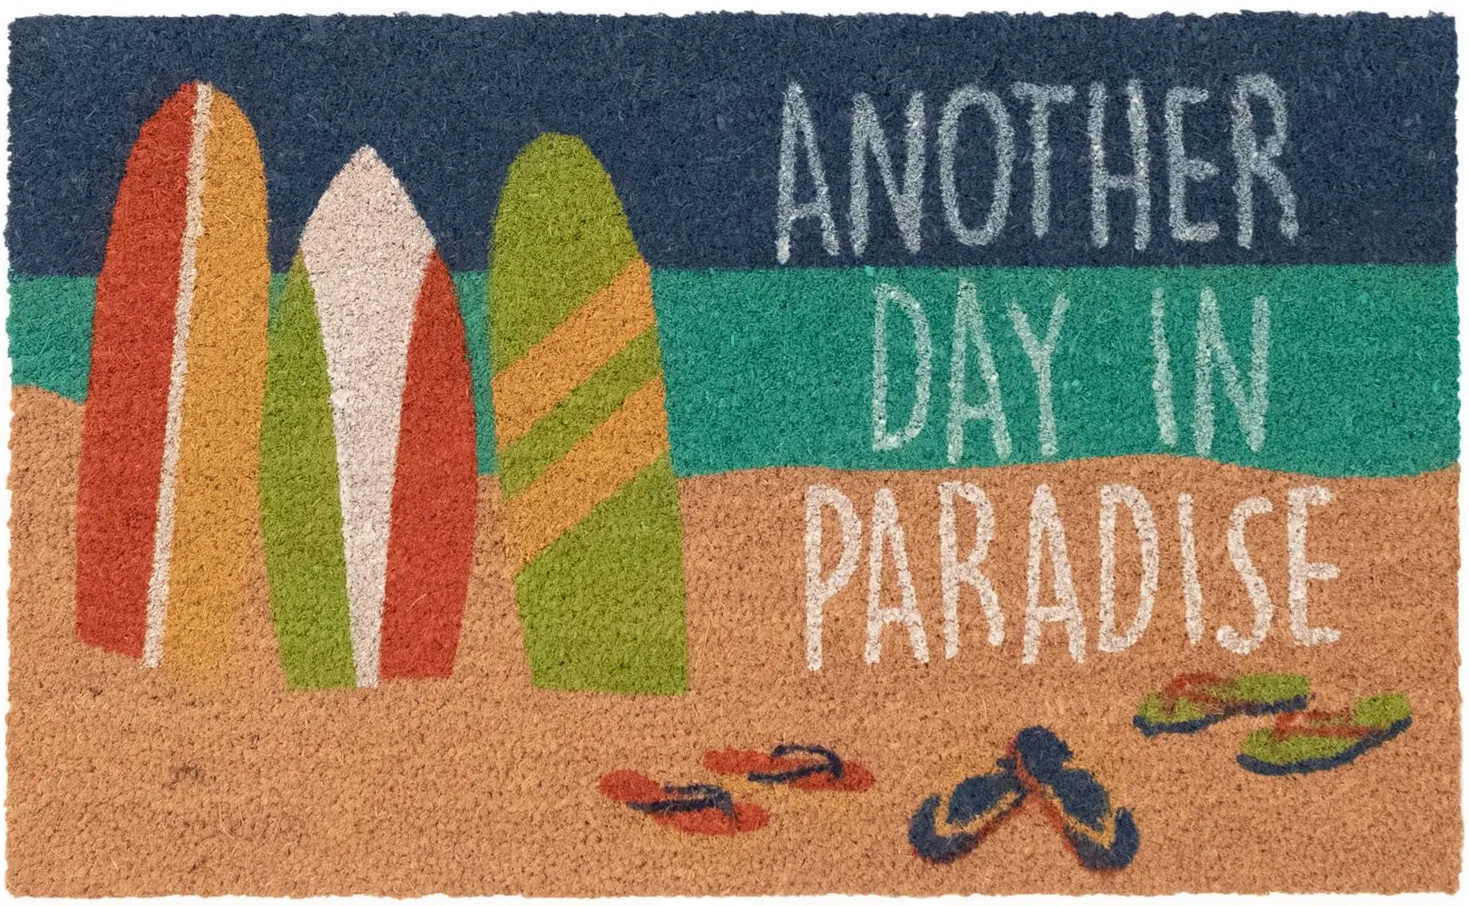 Liora Manne Natura Beach Paradise Outdoor Mat in Blue by Trans-Ocean Import Co Inc